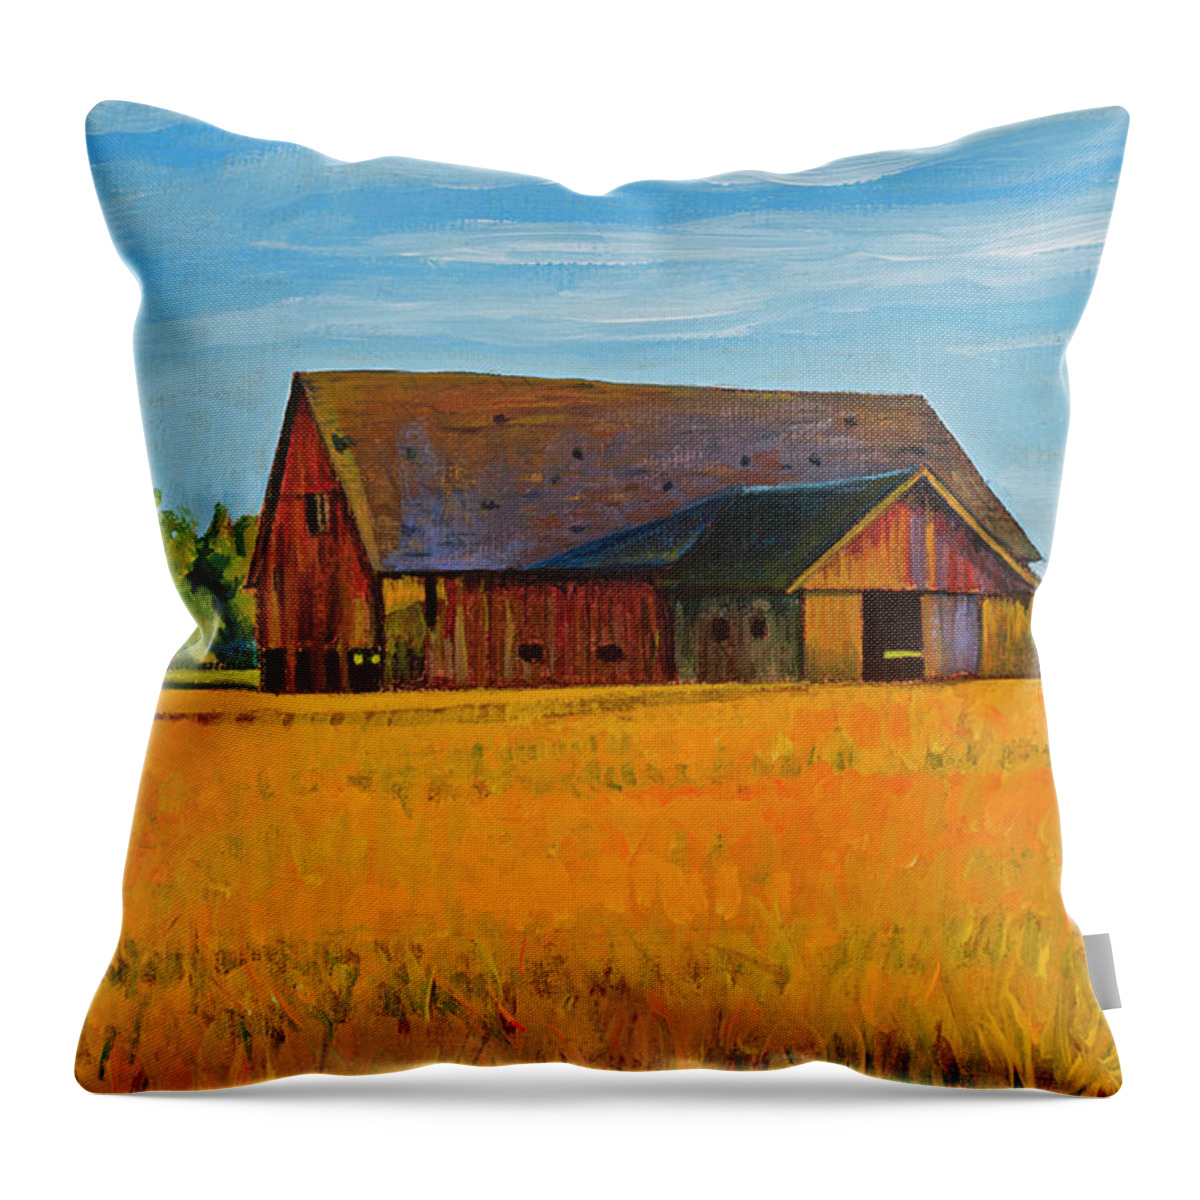 Landscape Throw Pillow featuring the painting Skagit Valley Barn #9 by Stacey Neumiller